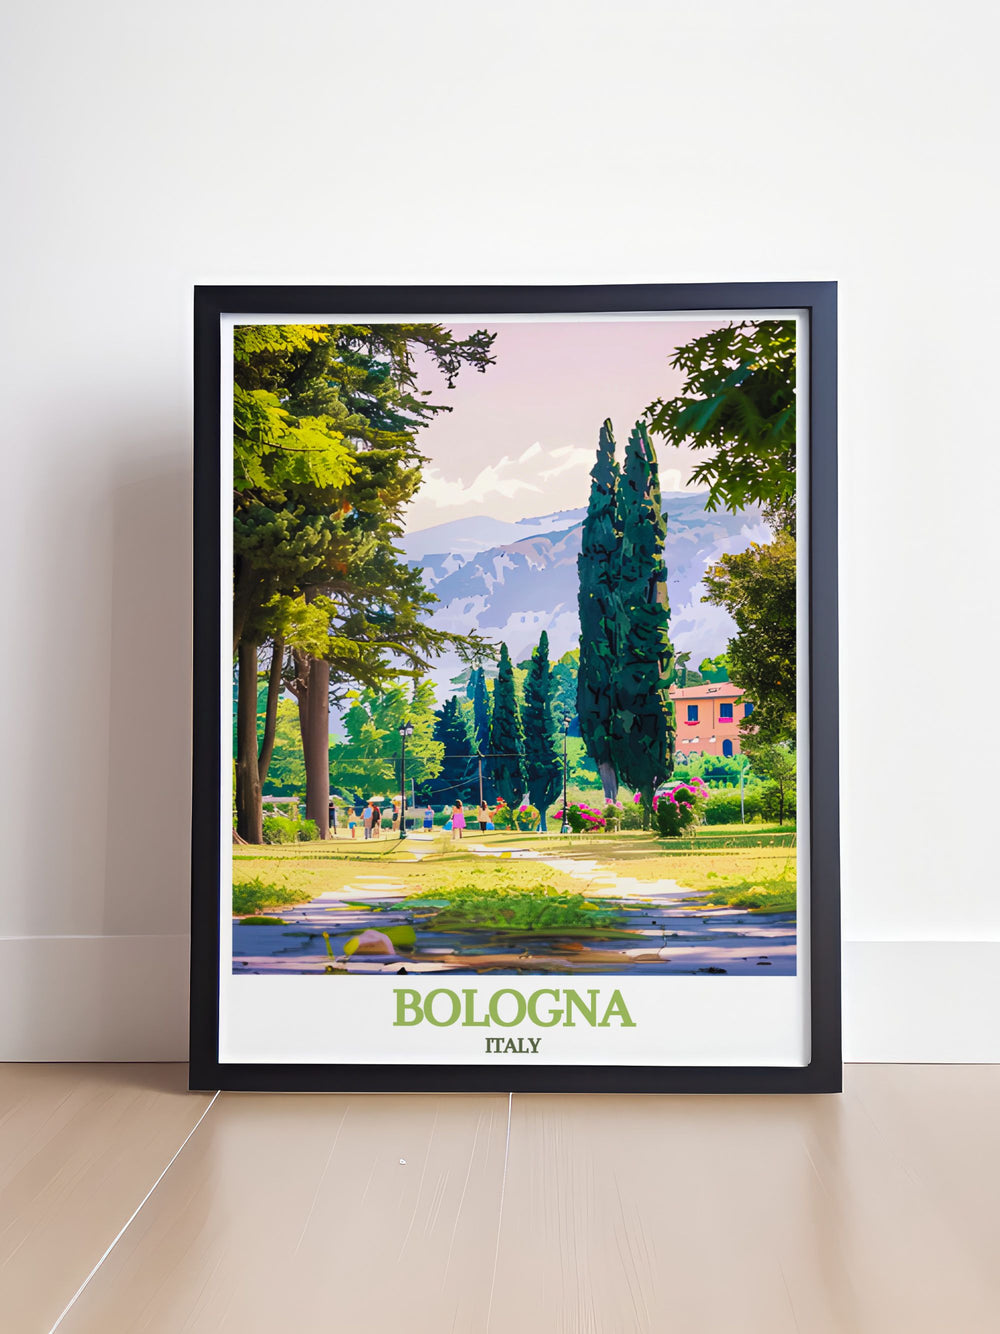 Elegant Bologna wall art depicting the Two Towers and the scenic Giardini Margherita, showcasing the citys urban charm and natural tranquility. Perfect for adding sophistication to any room.